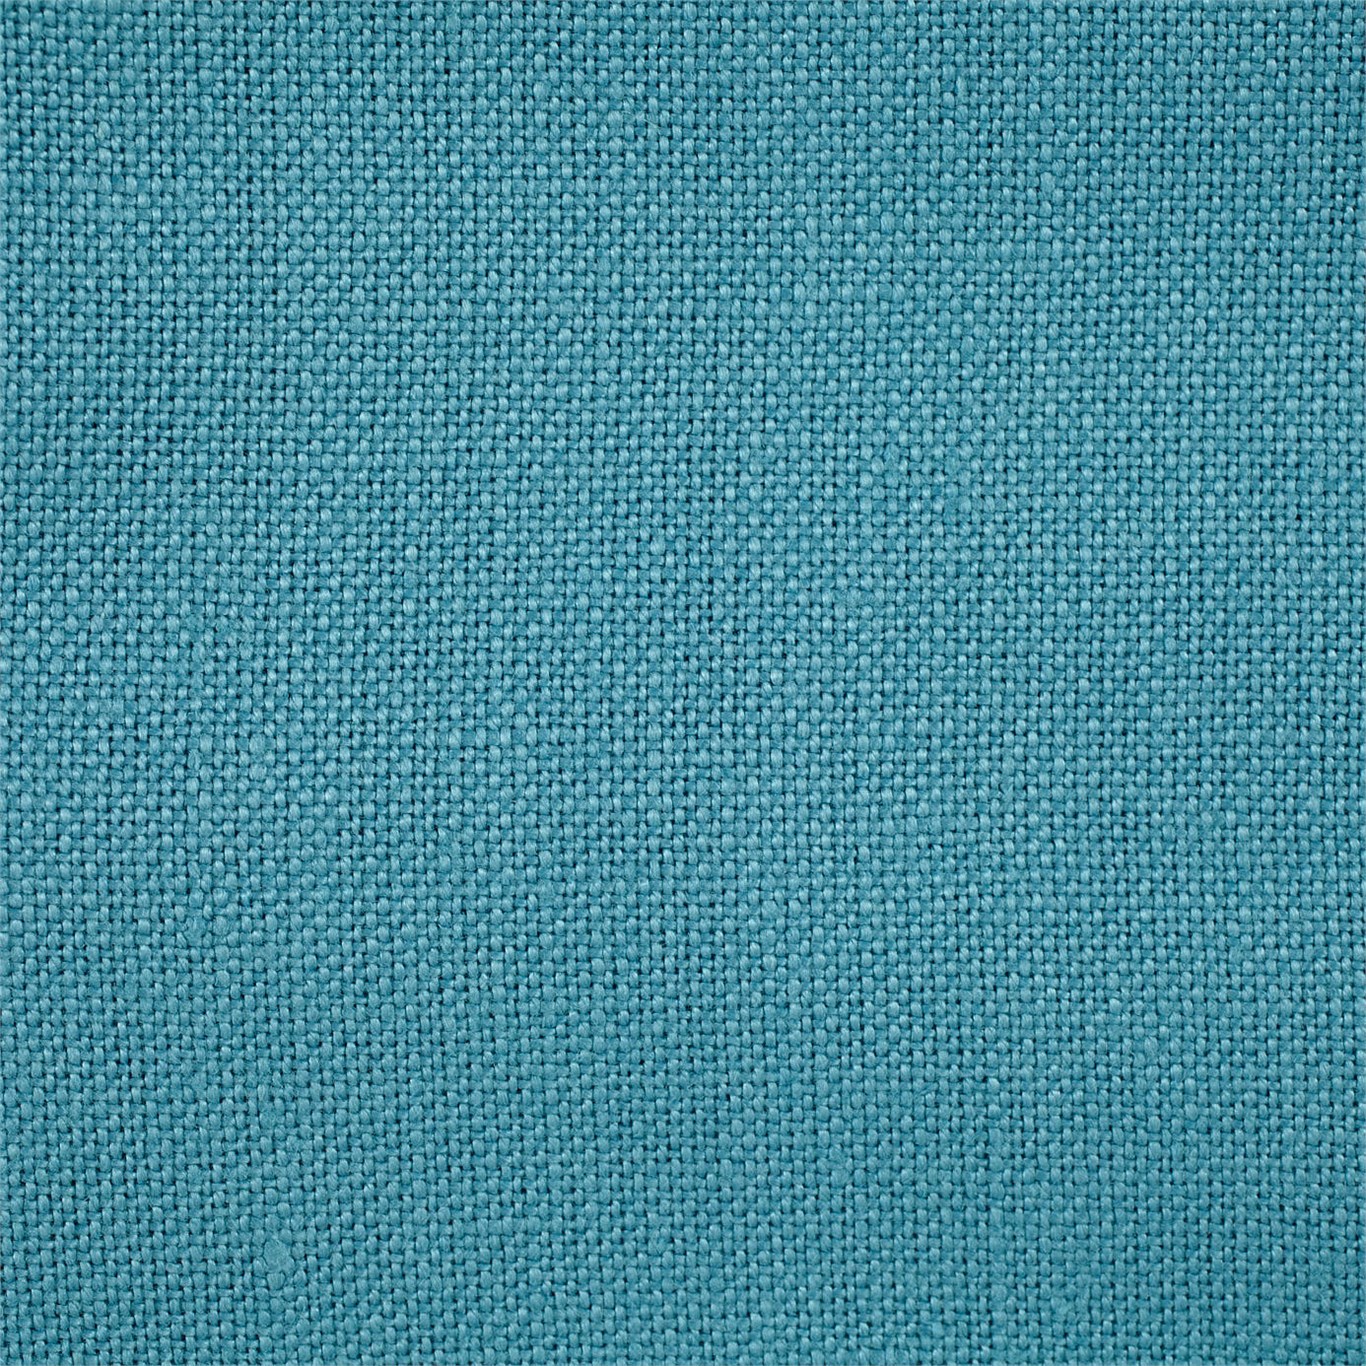 Malbec Turquoise Fabric by SAN